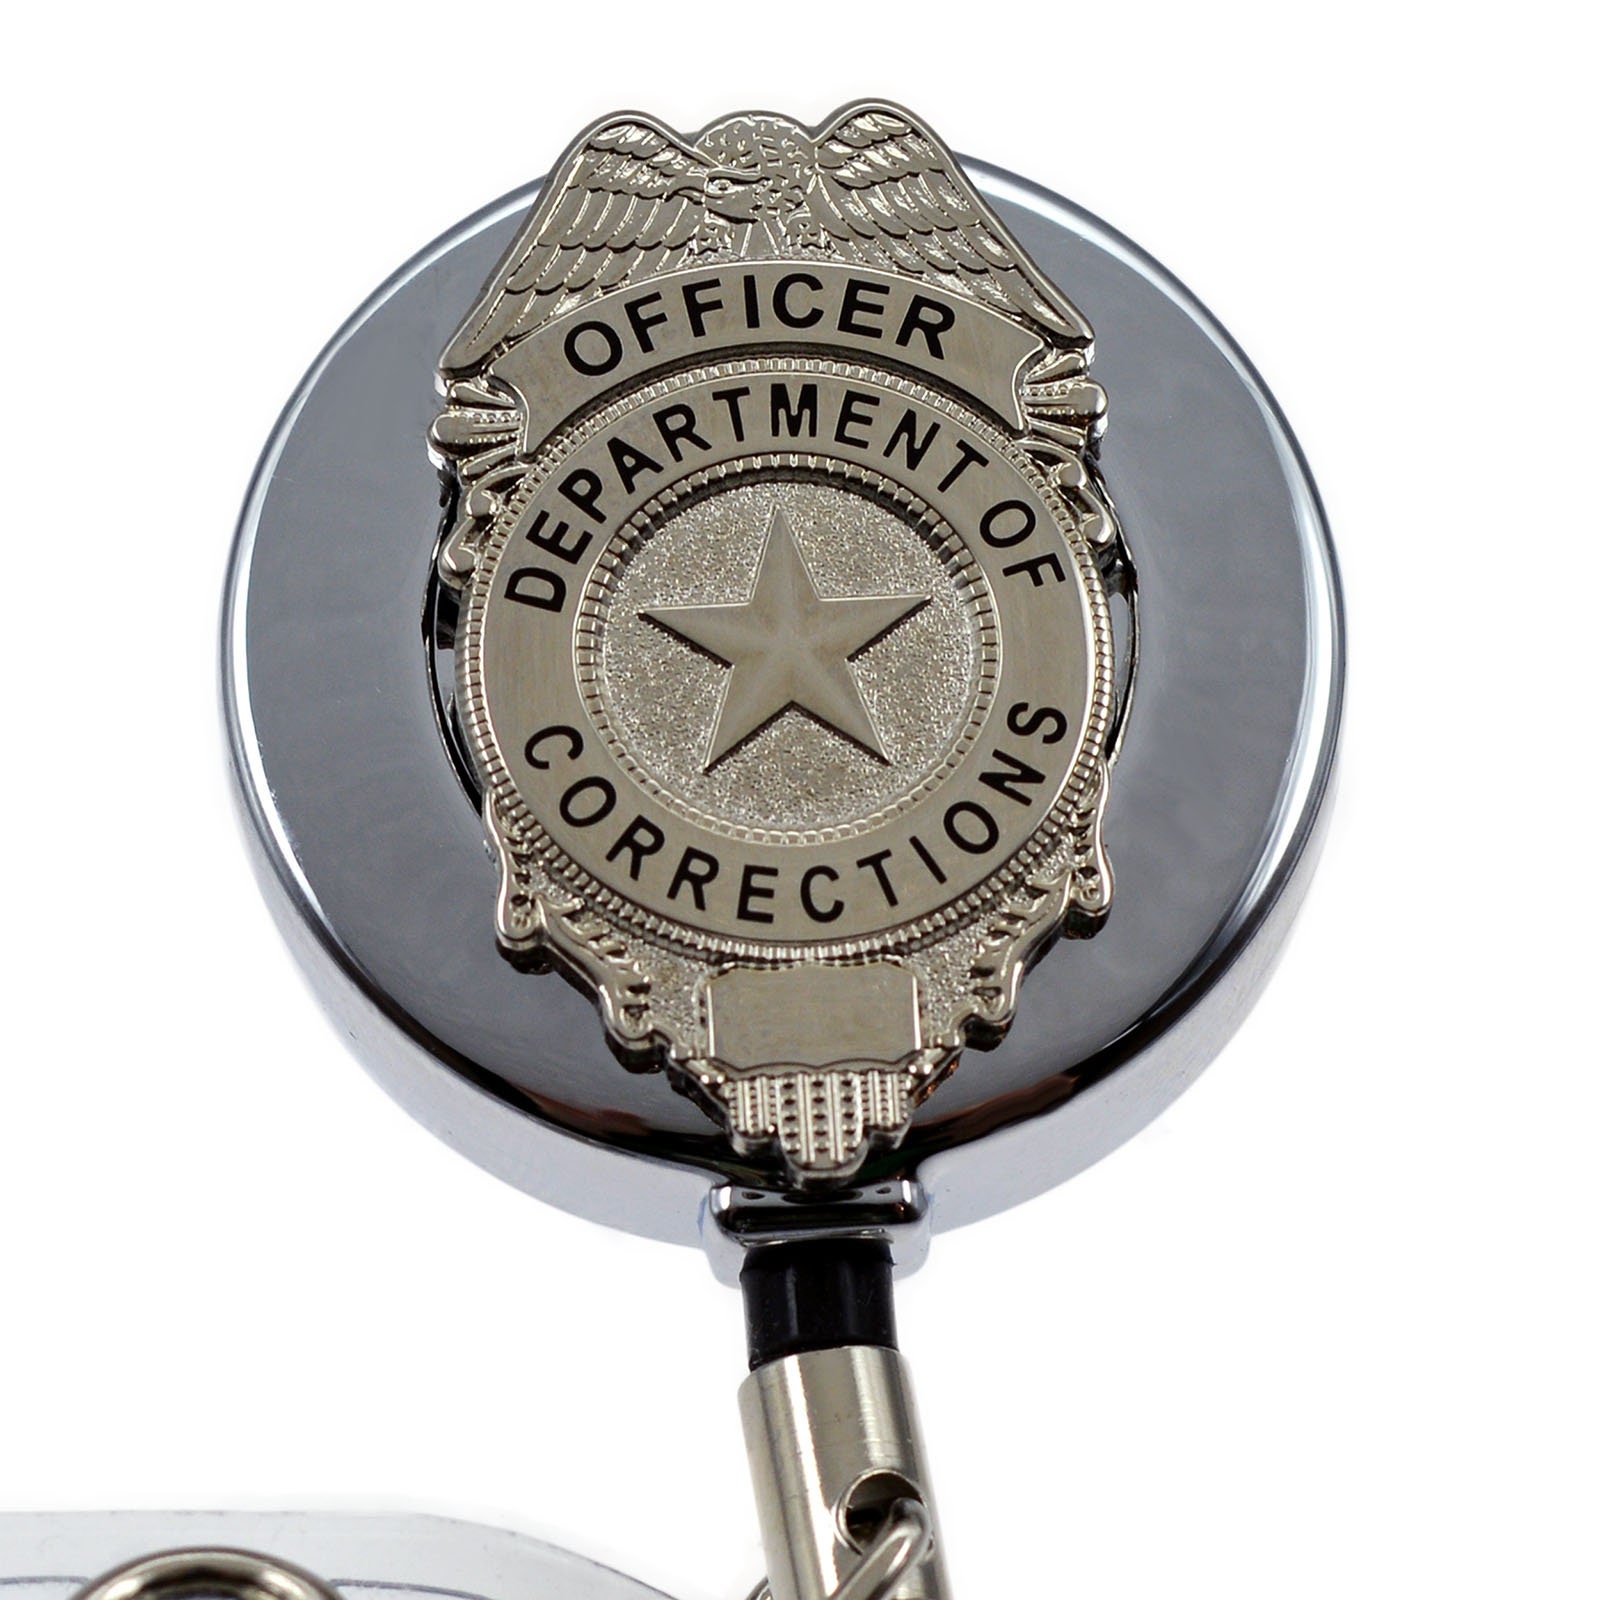 Department of Corrections Officer Badge Reel ID Security Pass